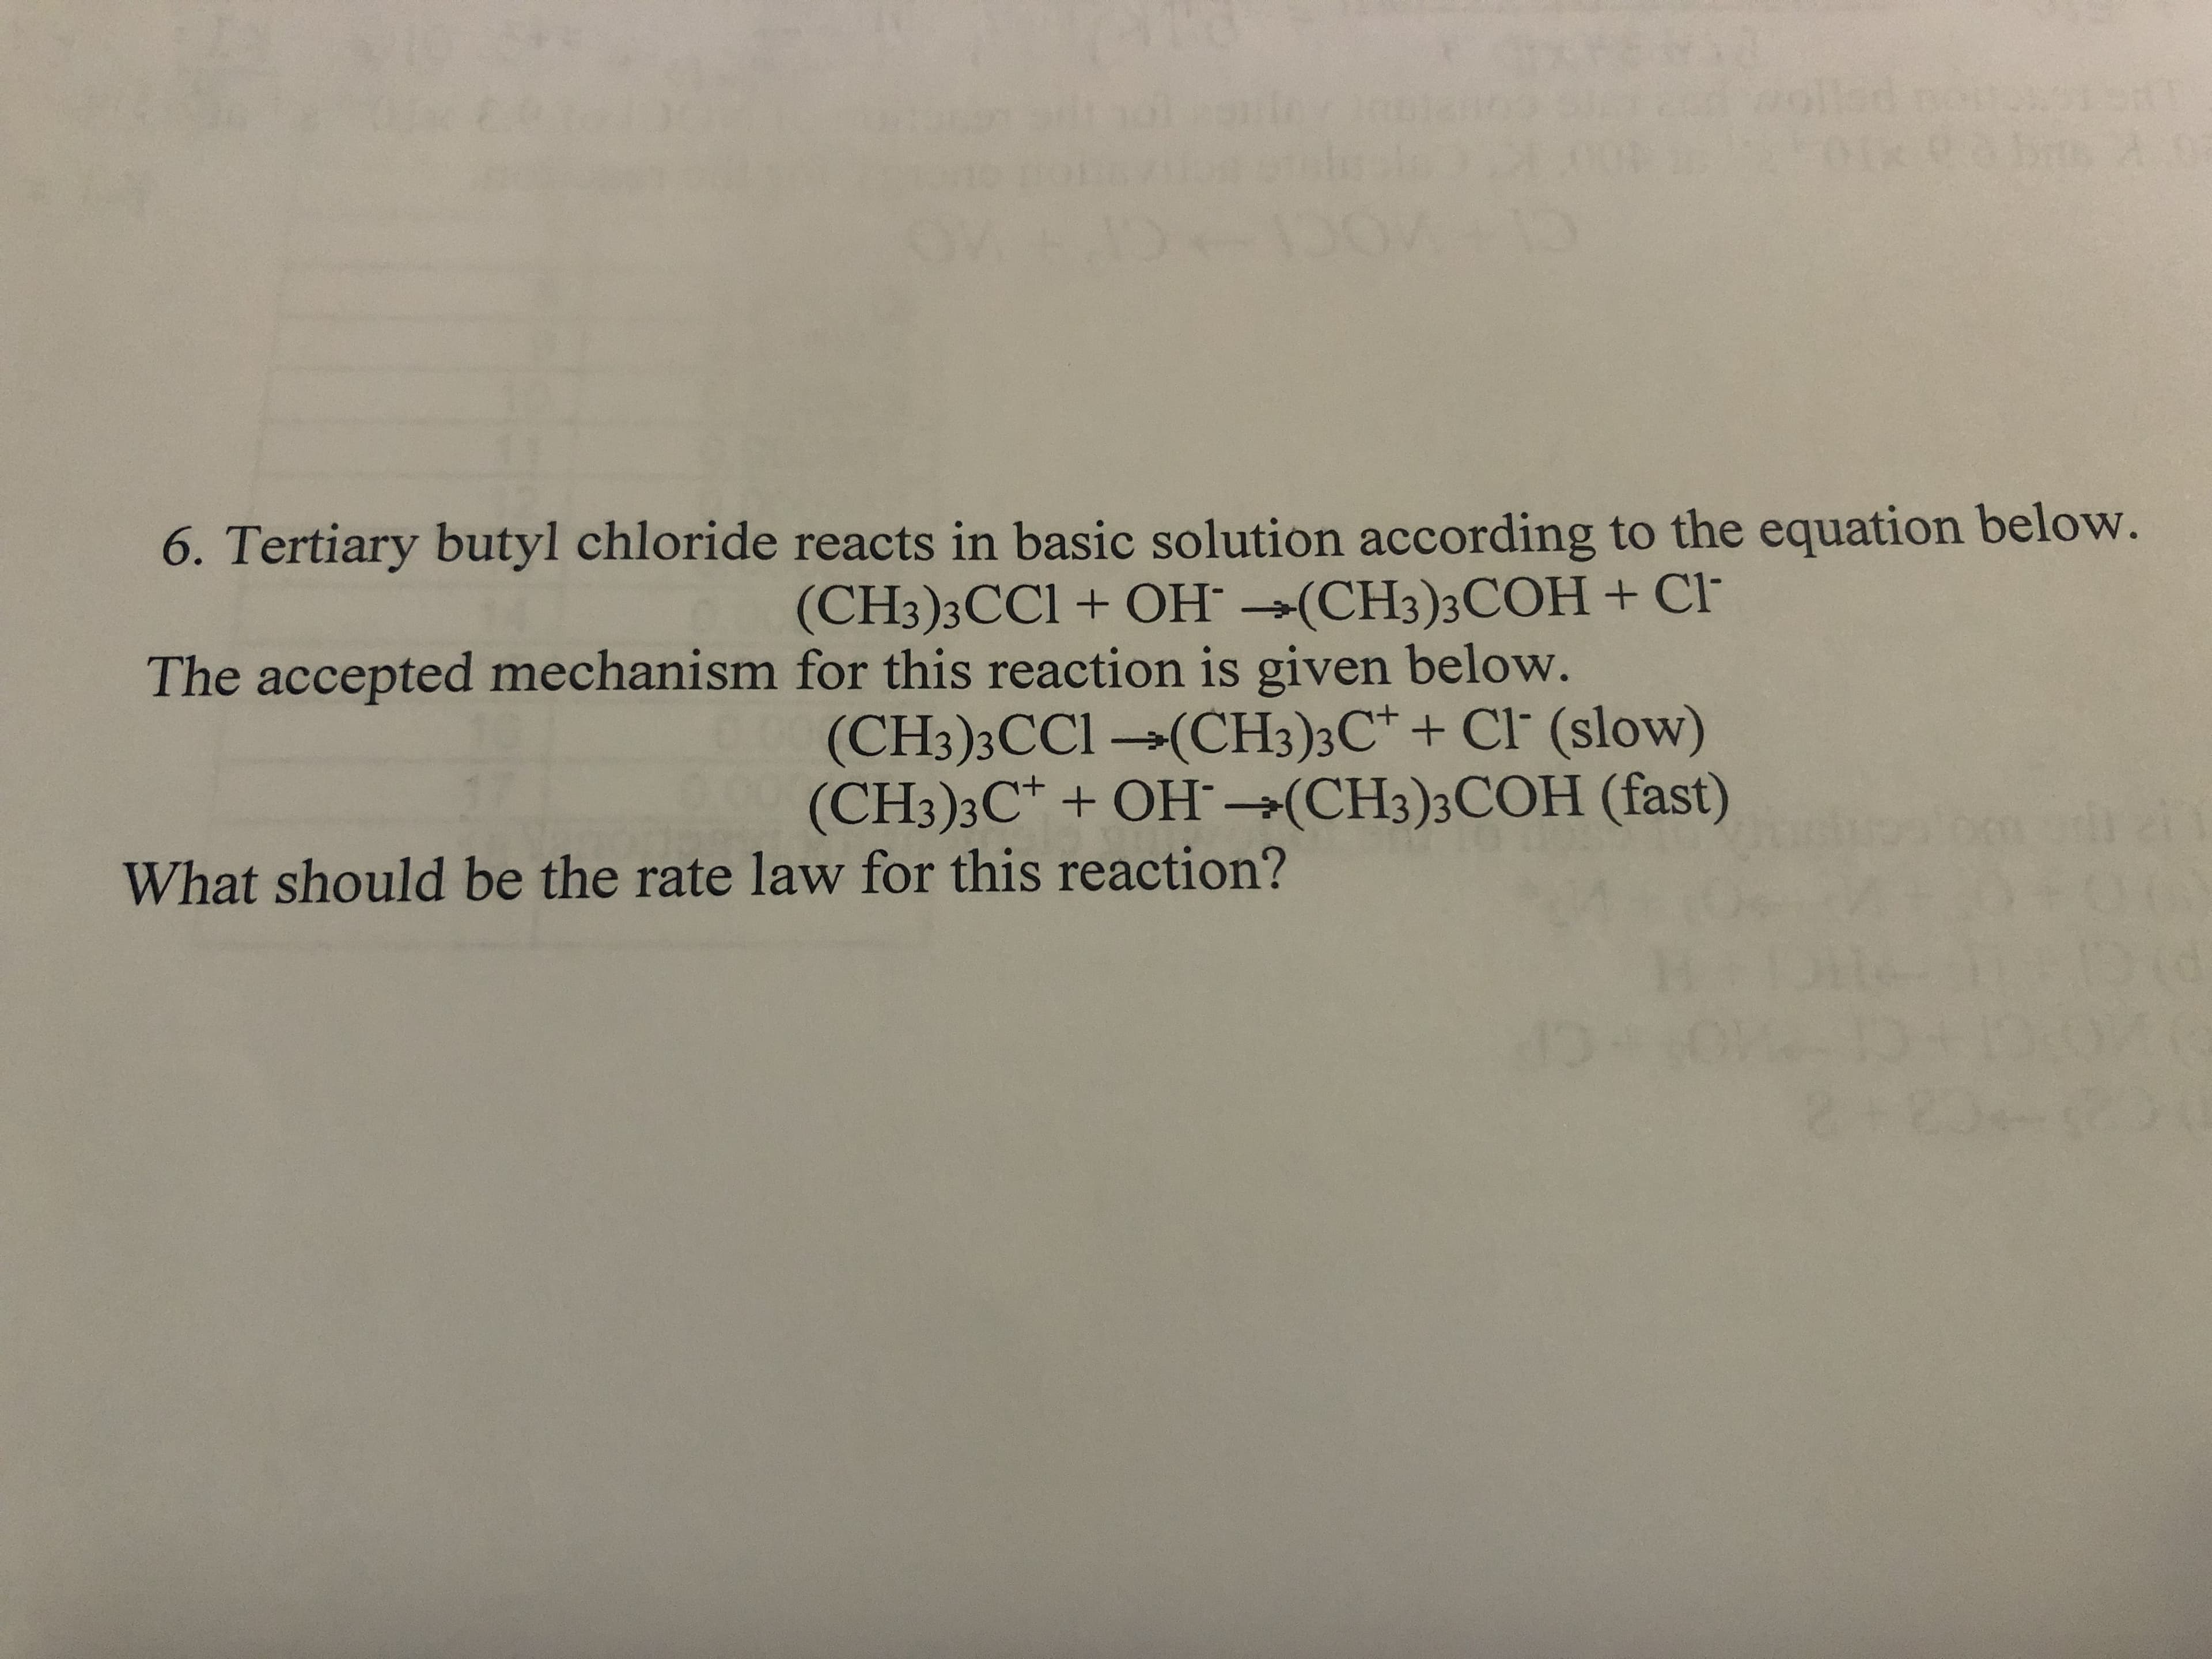 6. Tertiary butyl chloride reacts in basic solution according to the equation below.
(CH3)3CC1 + OH →(CH3)3COH + Cl
The accepted mechanism for this reaction is given below.
(CH3)3CC1 →(CH3)3C* + Cl' (slow)
(CH3);C* + OH¯→(CH3)3COH (fast)
What should be the rate law for this reaction?
